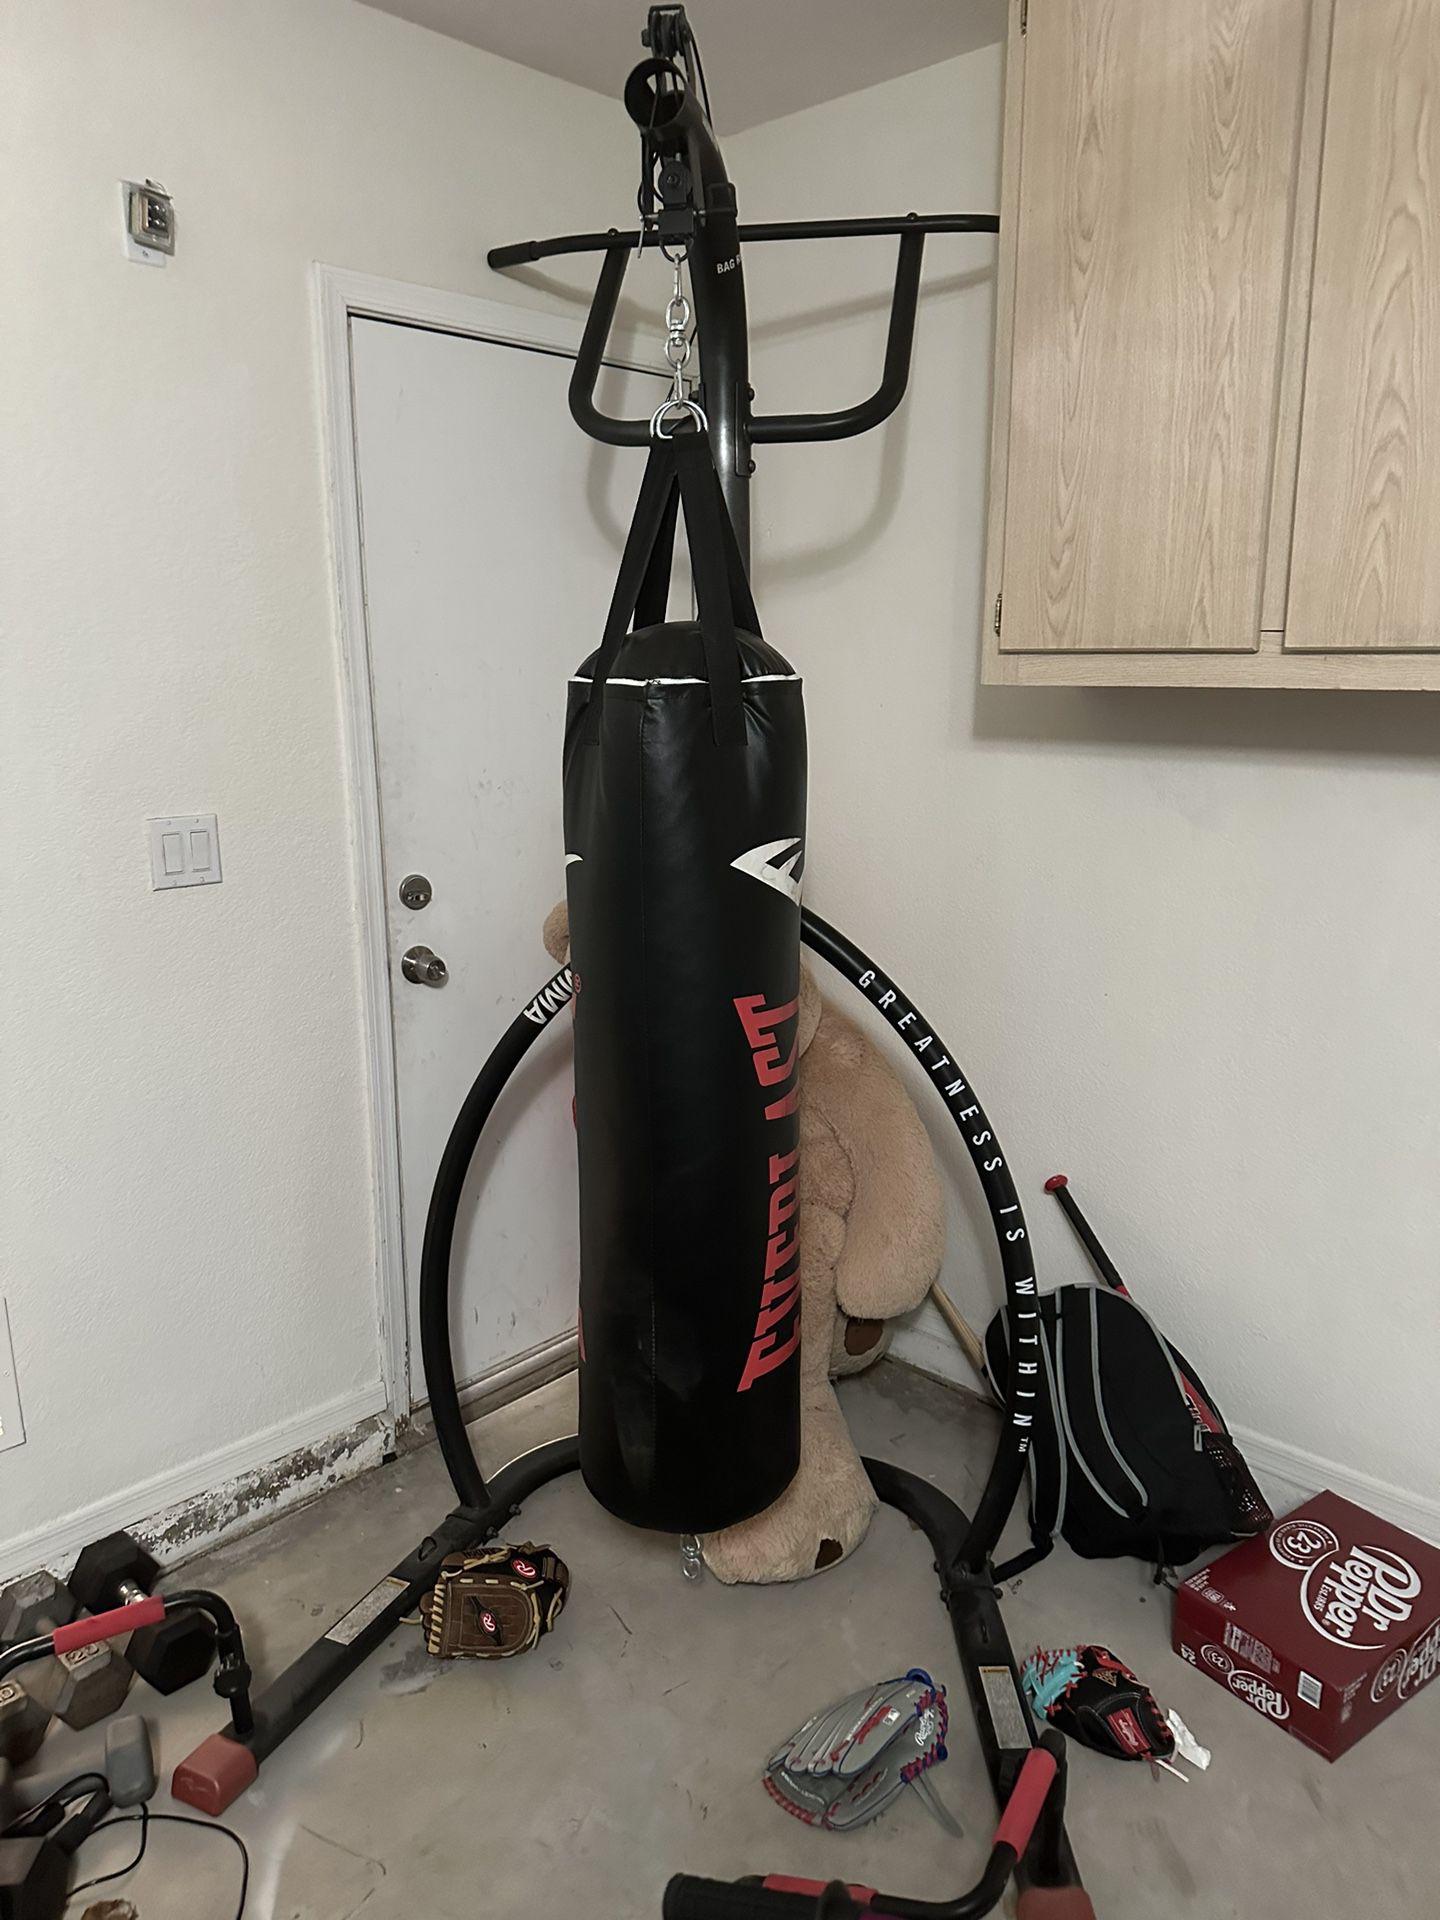 Everlast Punching Bag with Stand 